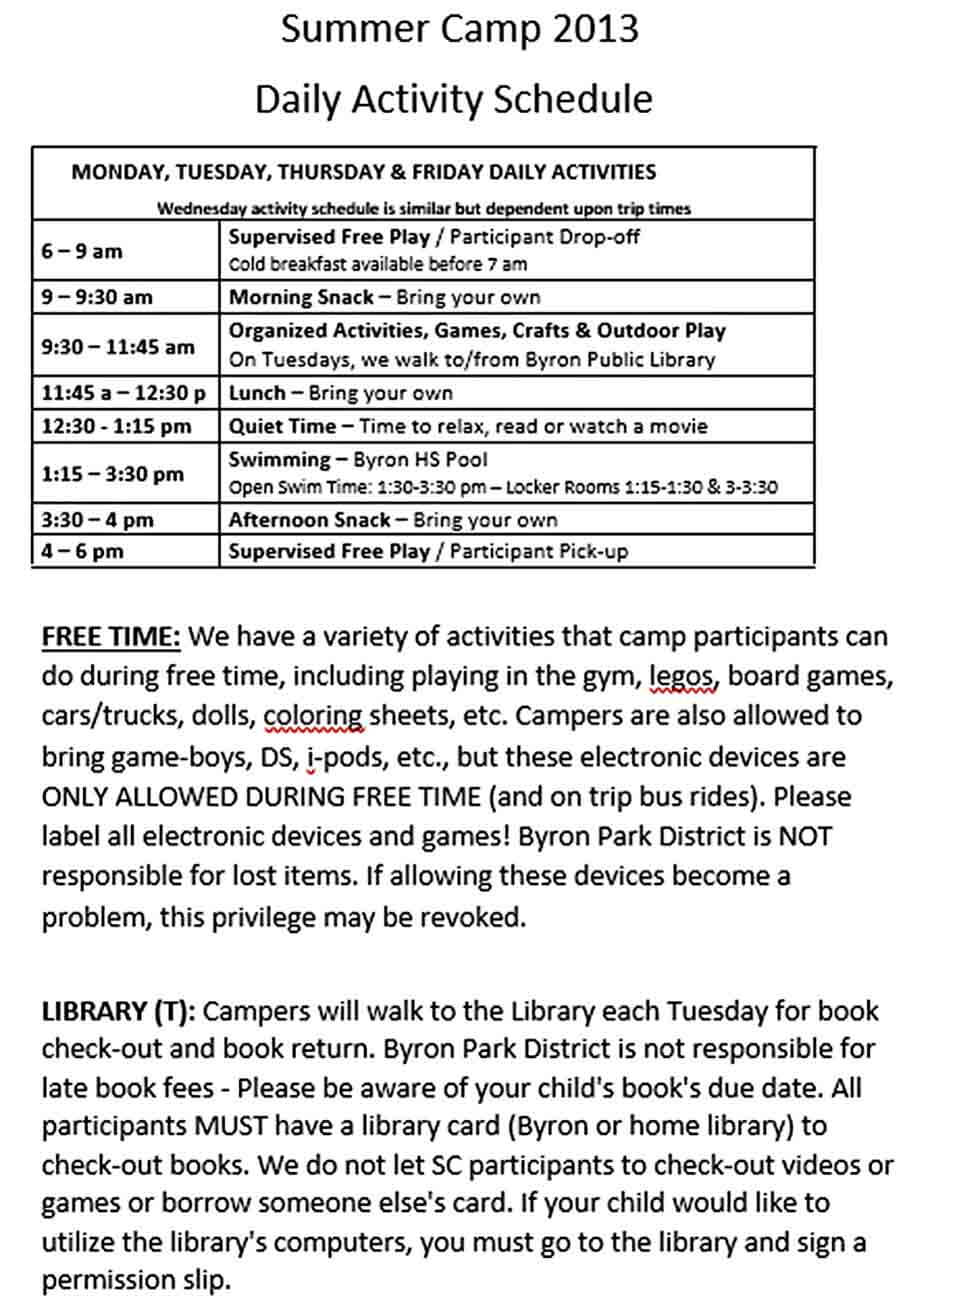 Summer Camp Daily Activity Schedule Template PDF Format